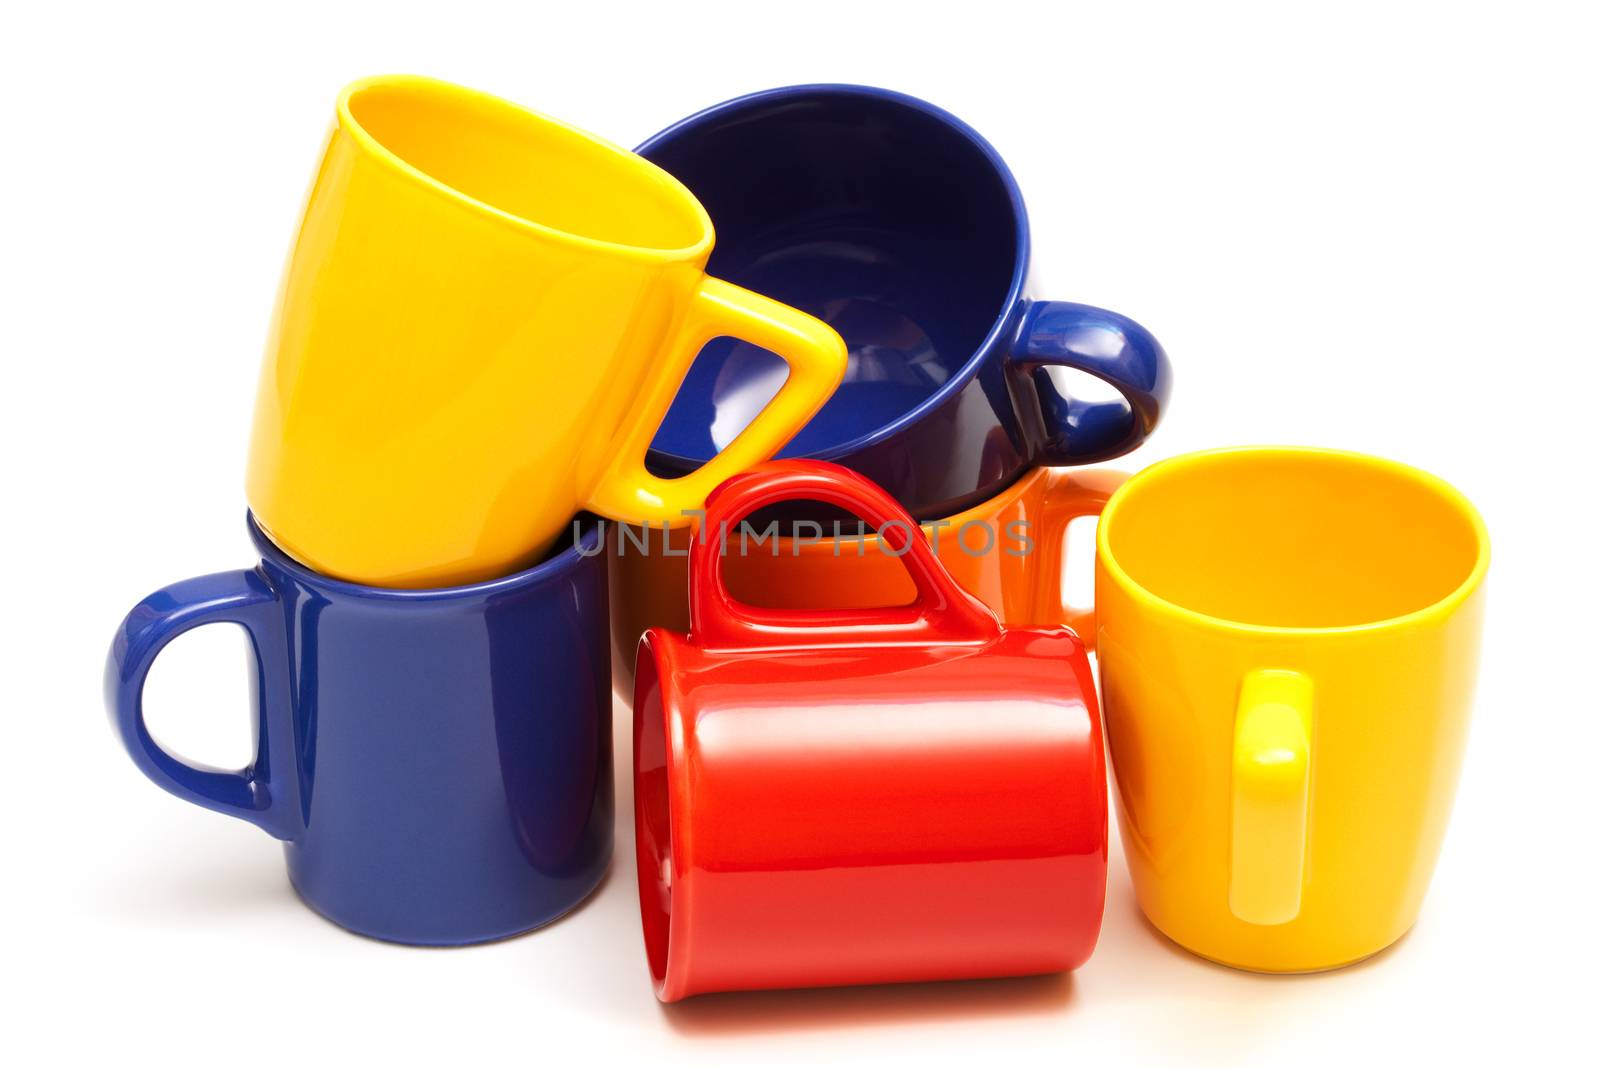 Beautiful color cups by terex